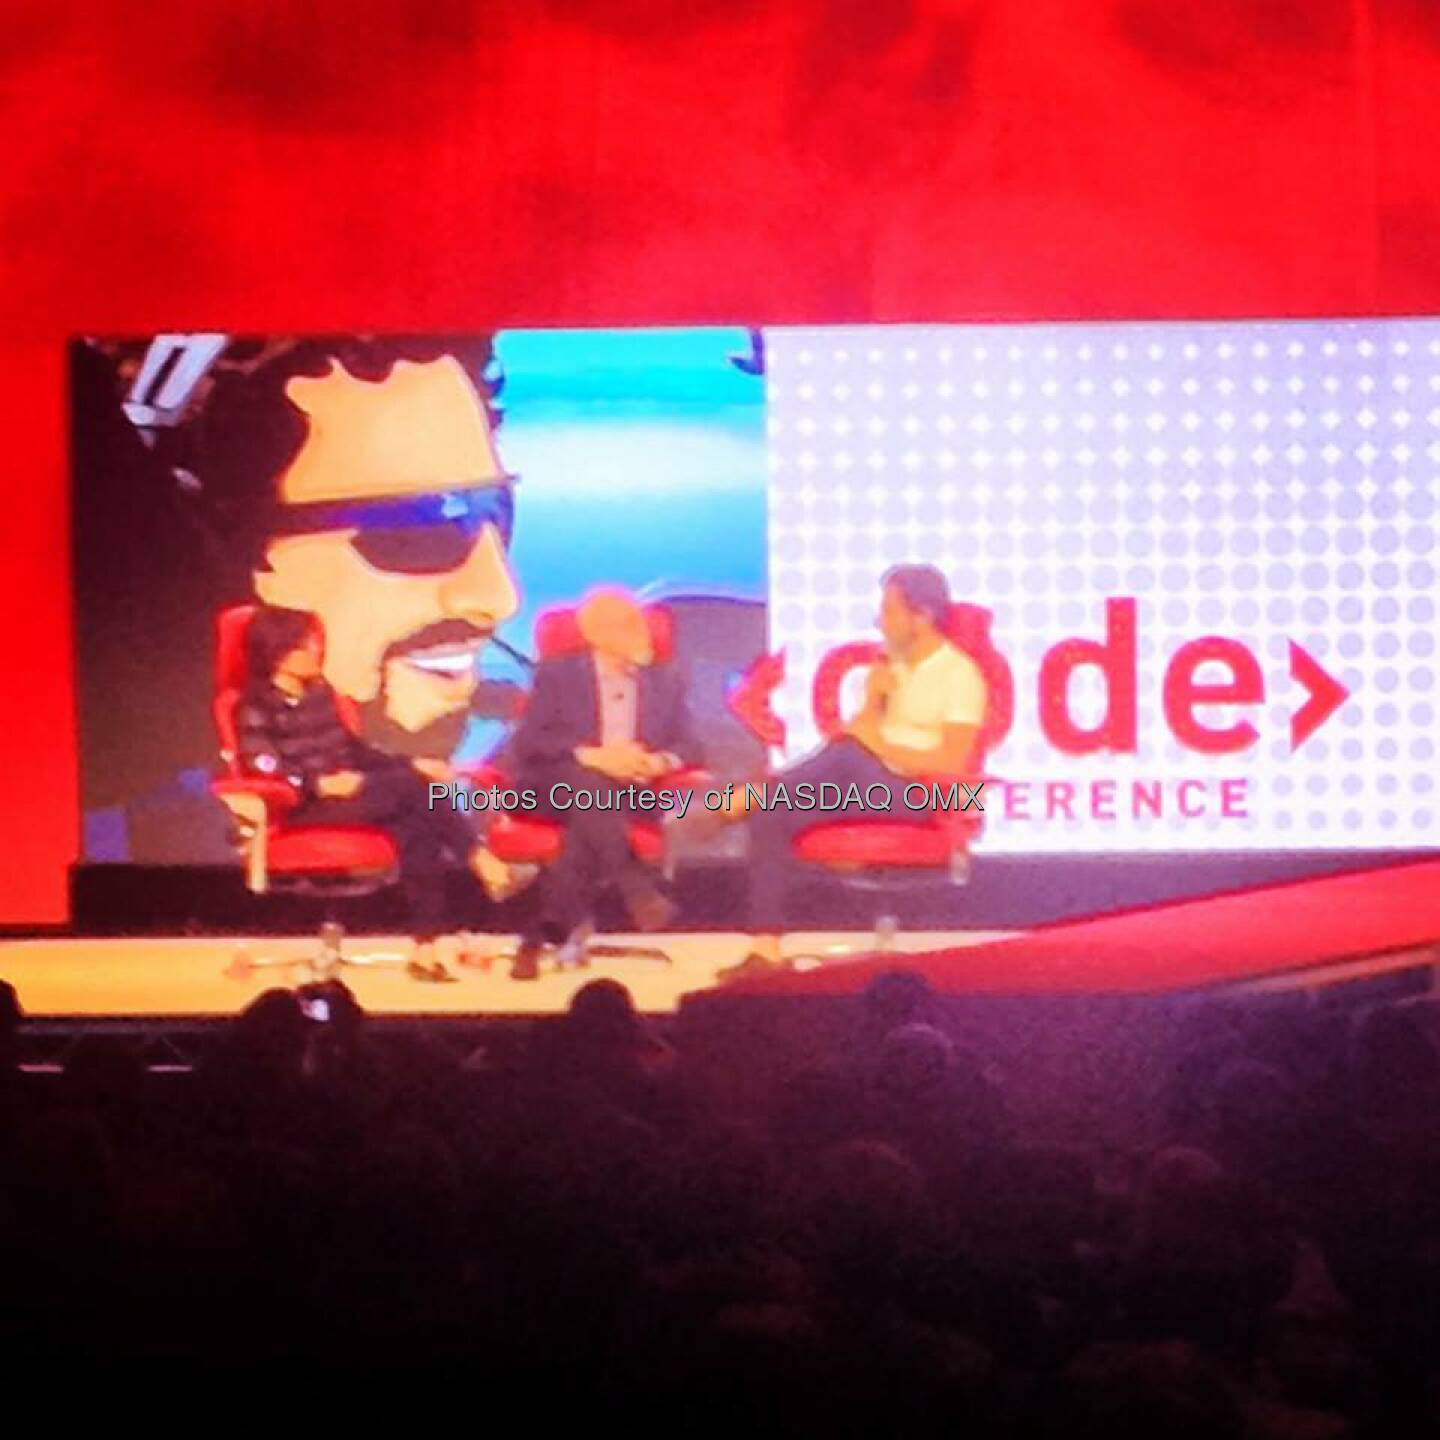 @Google co-founder Sergey Brin on stage to close out the opening night session at CodeCon. Source: http://facebook.com/NASDAQ